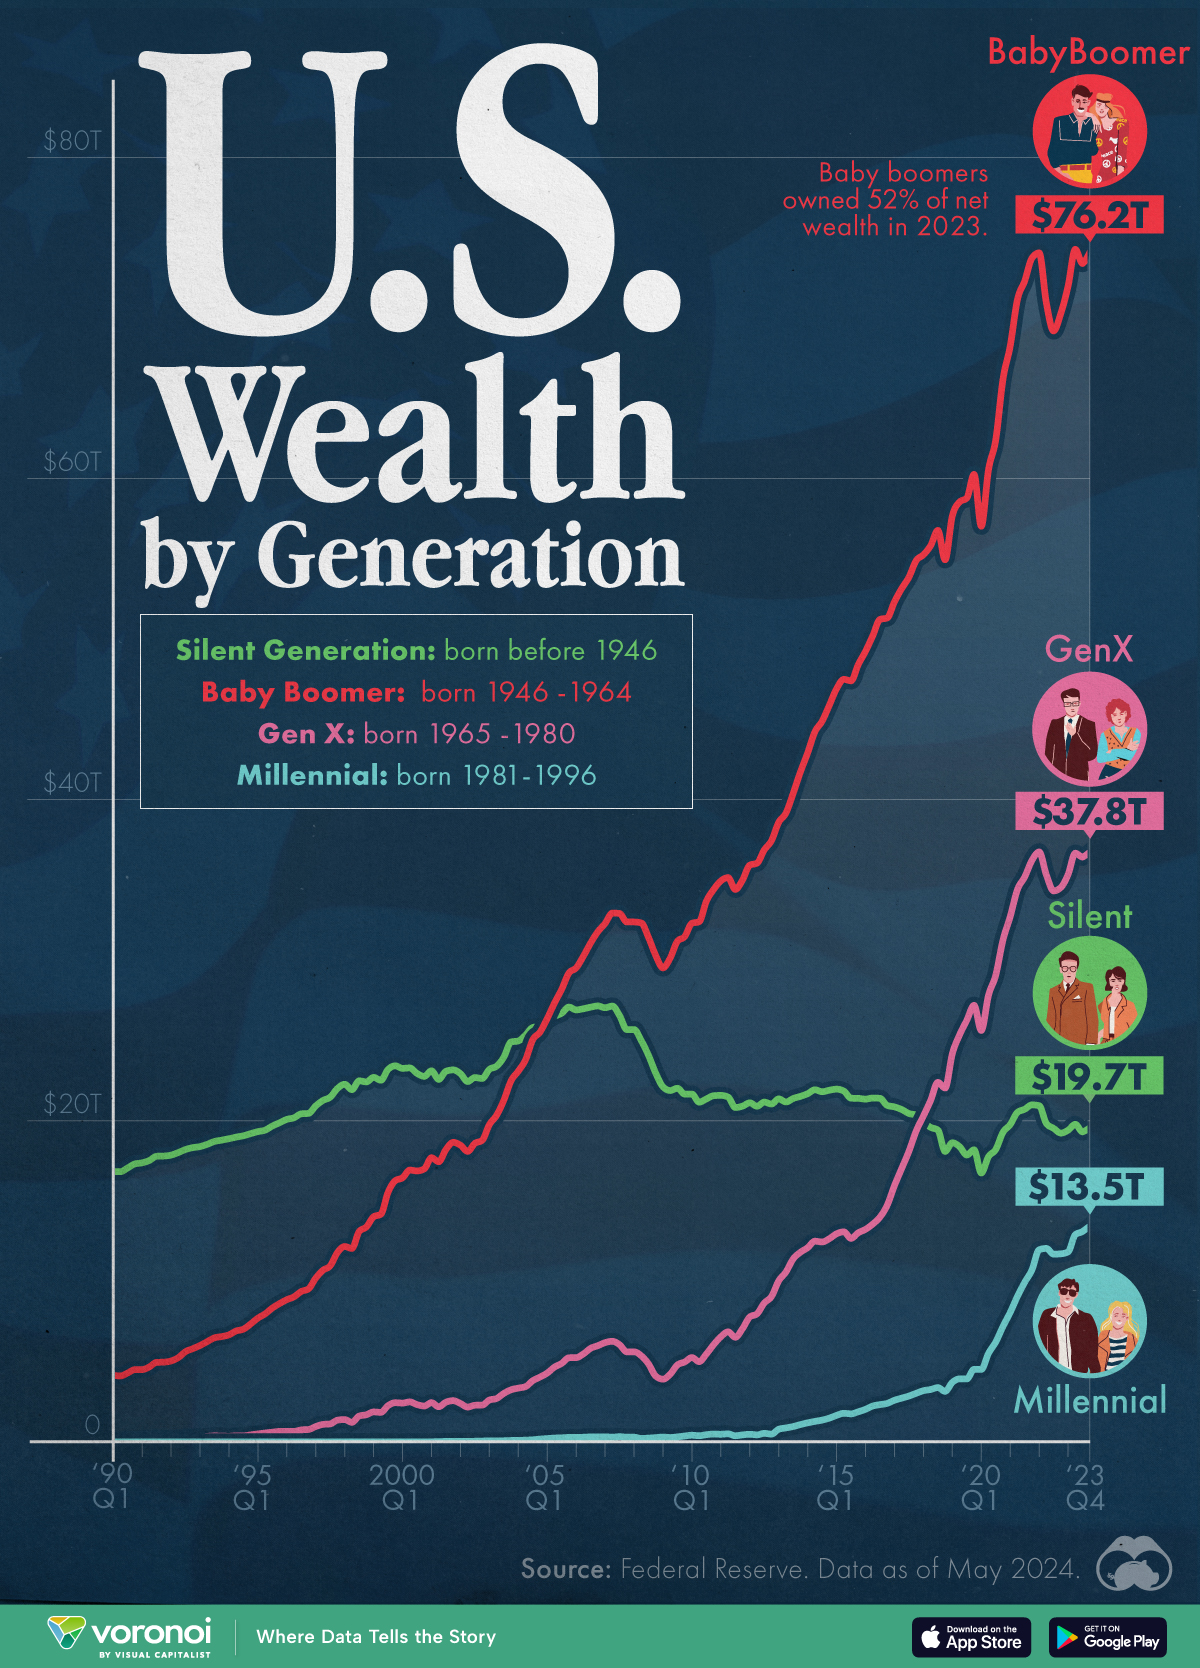 Line chart showing wealth by generation in the U.S.